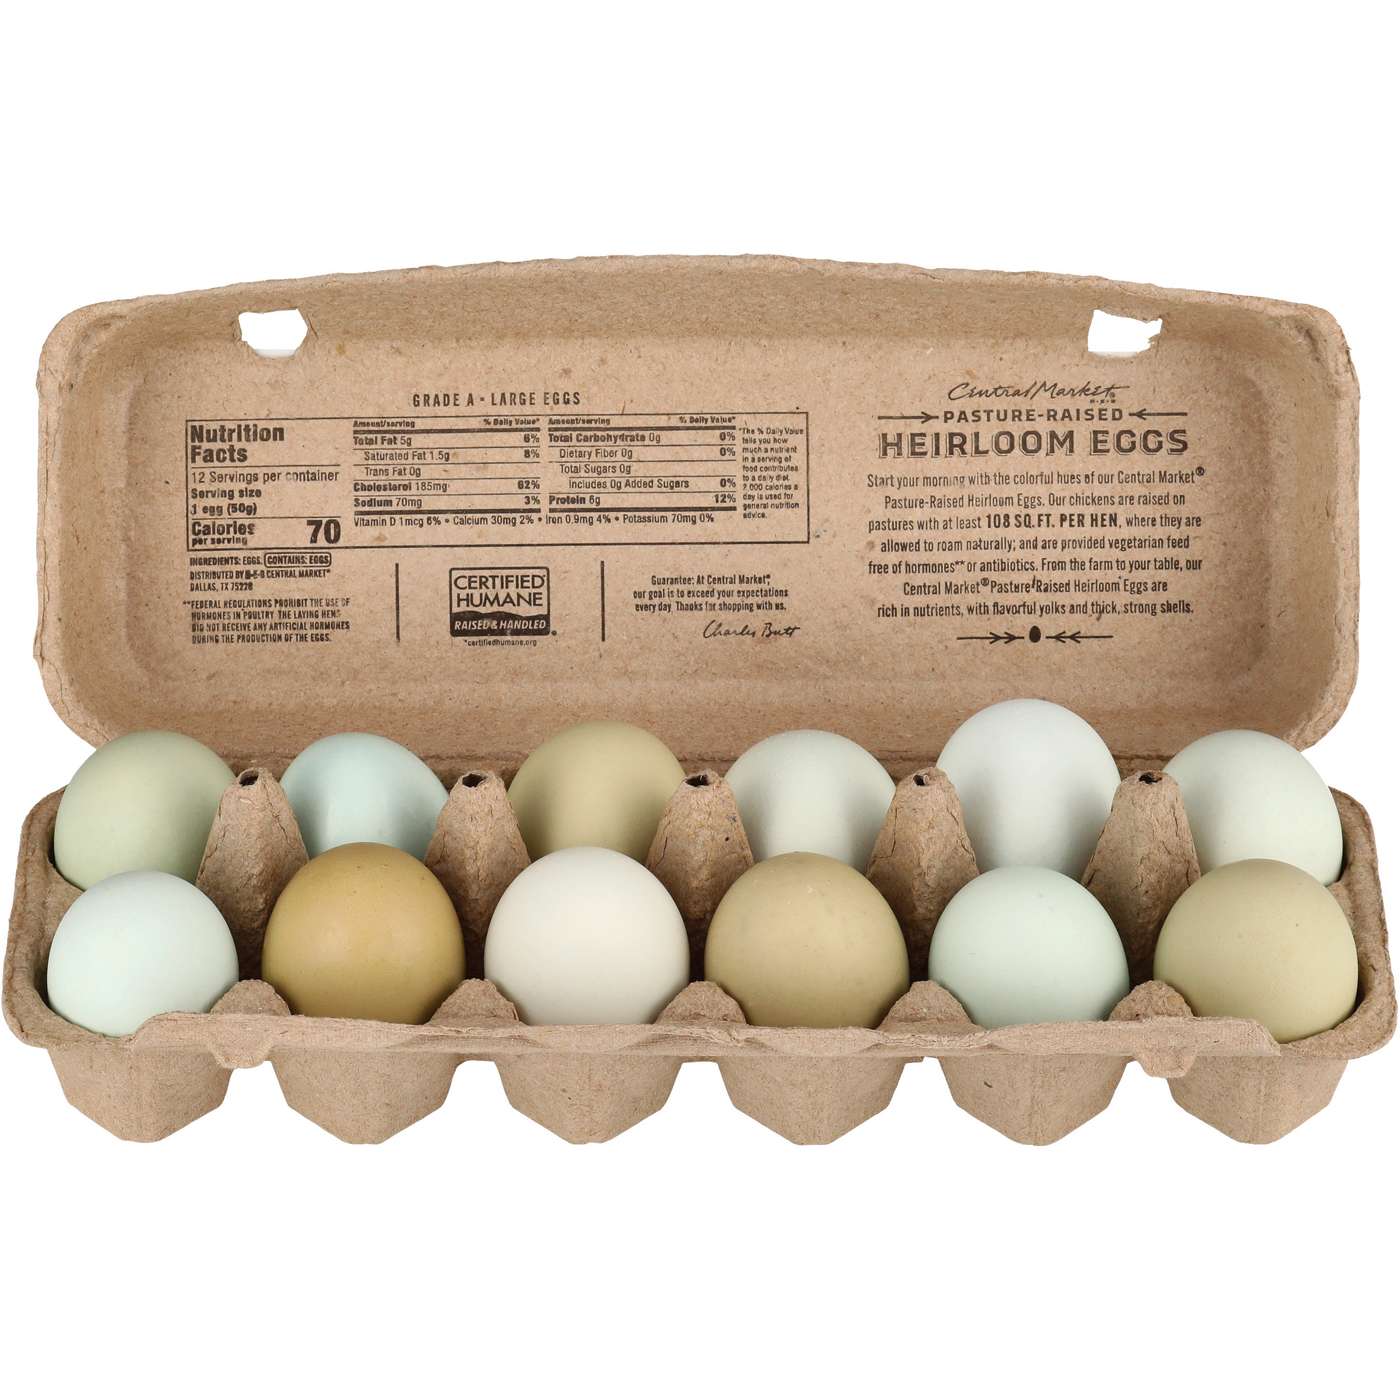 Central Market Pasture-Raised Heirloom Colorful Large Grade A Eggs; image 2 of 3